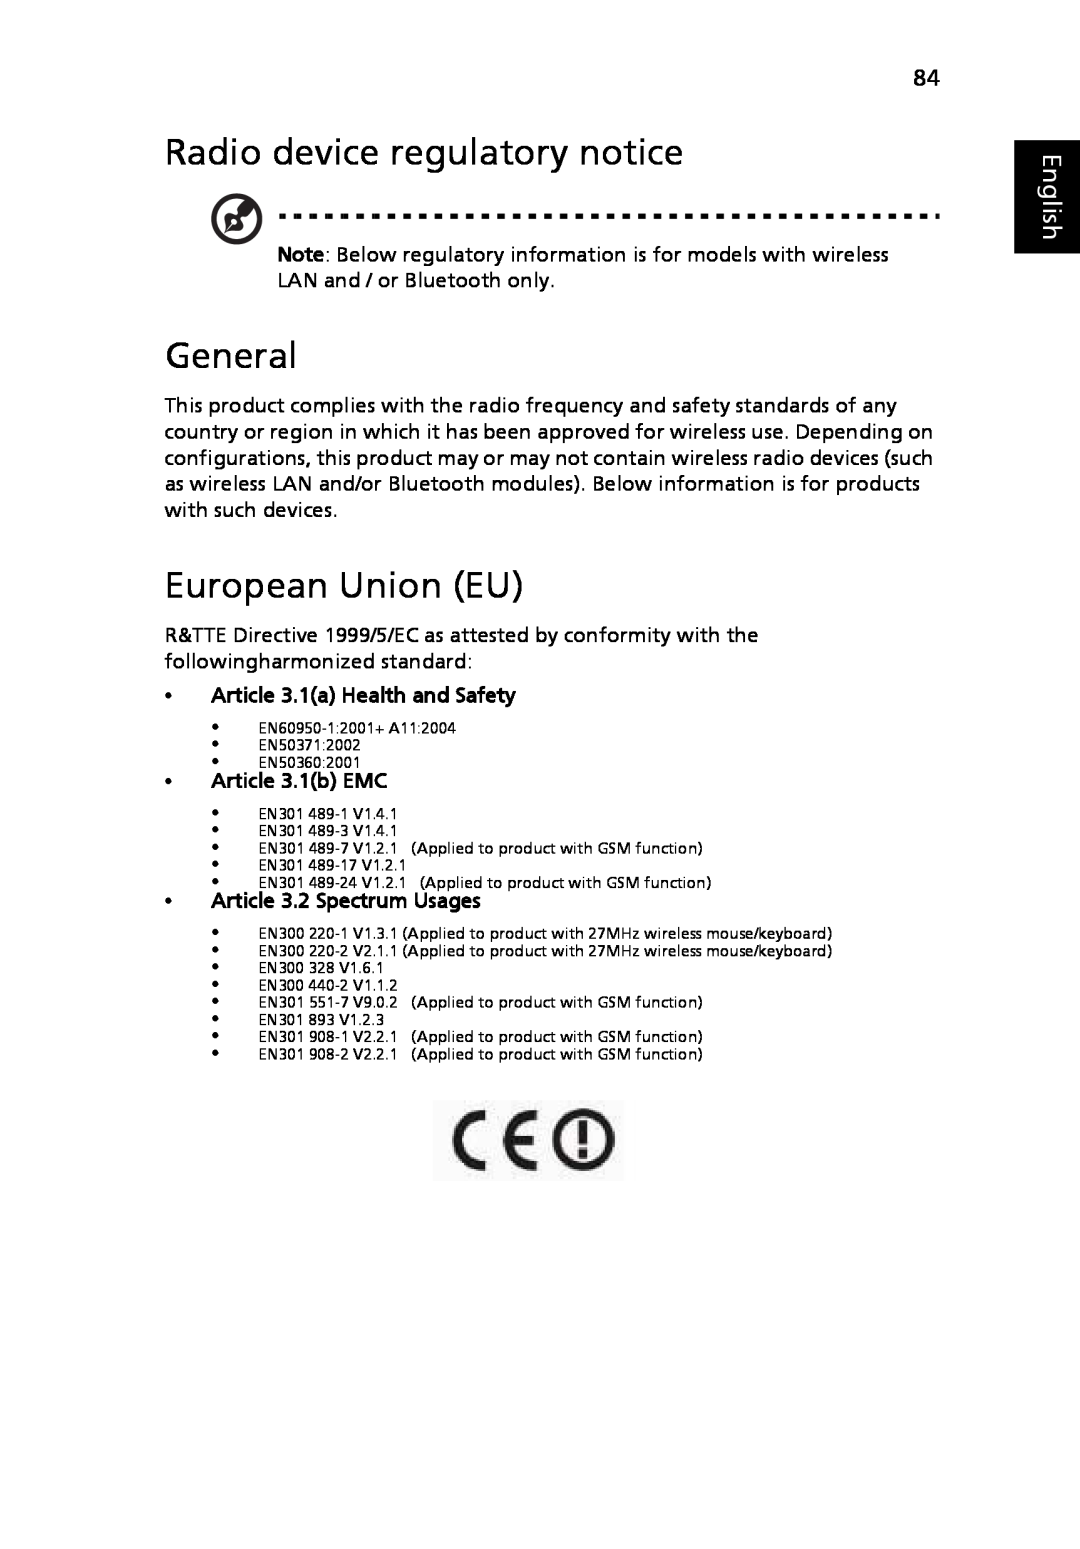 Acer LE1, 8920 Series Radio device regulatory notice, General, European Union EU, English, Article 3.1a Health and Safety 